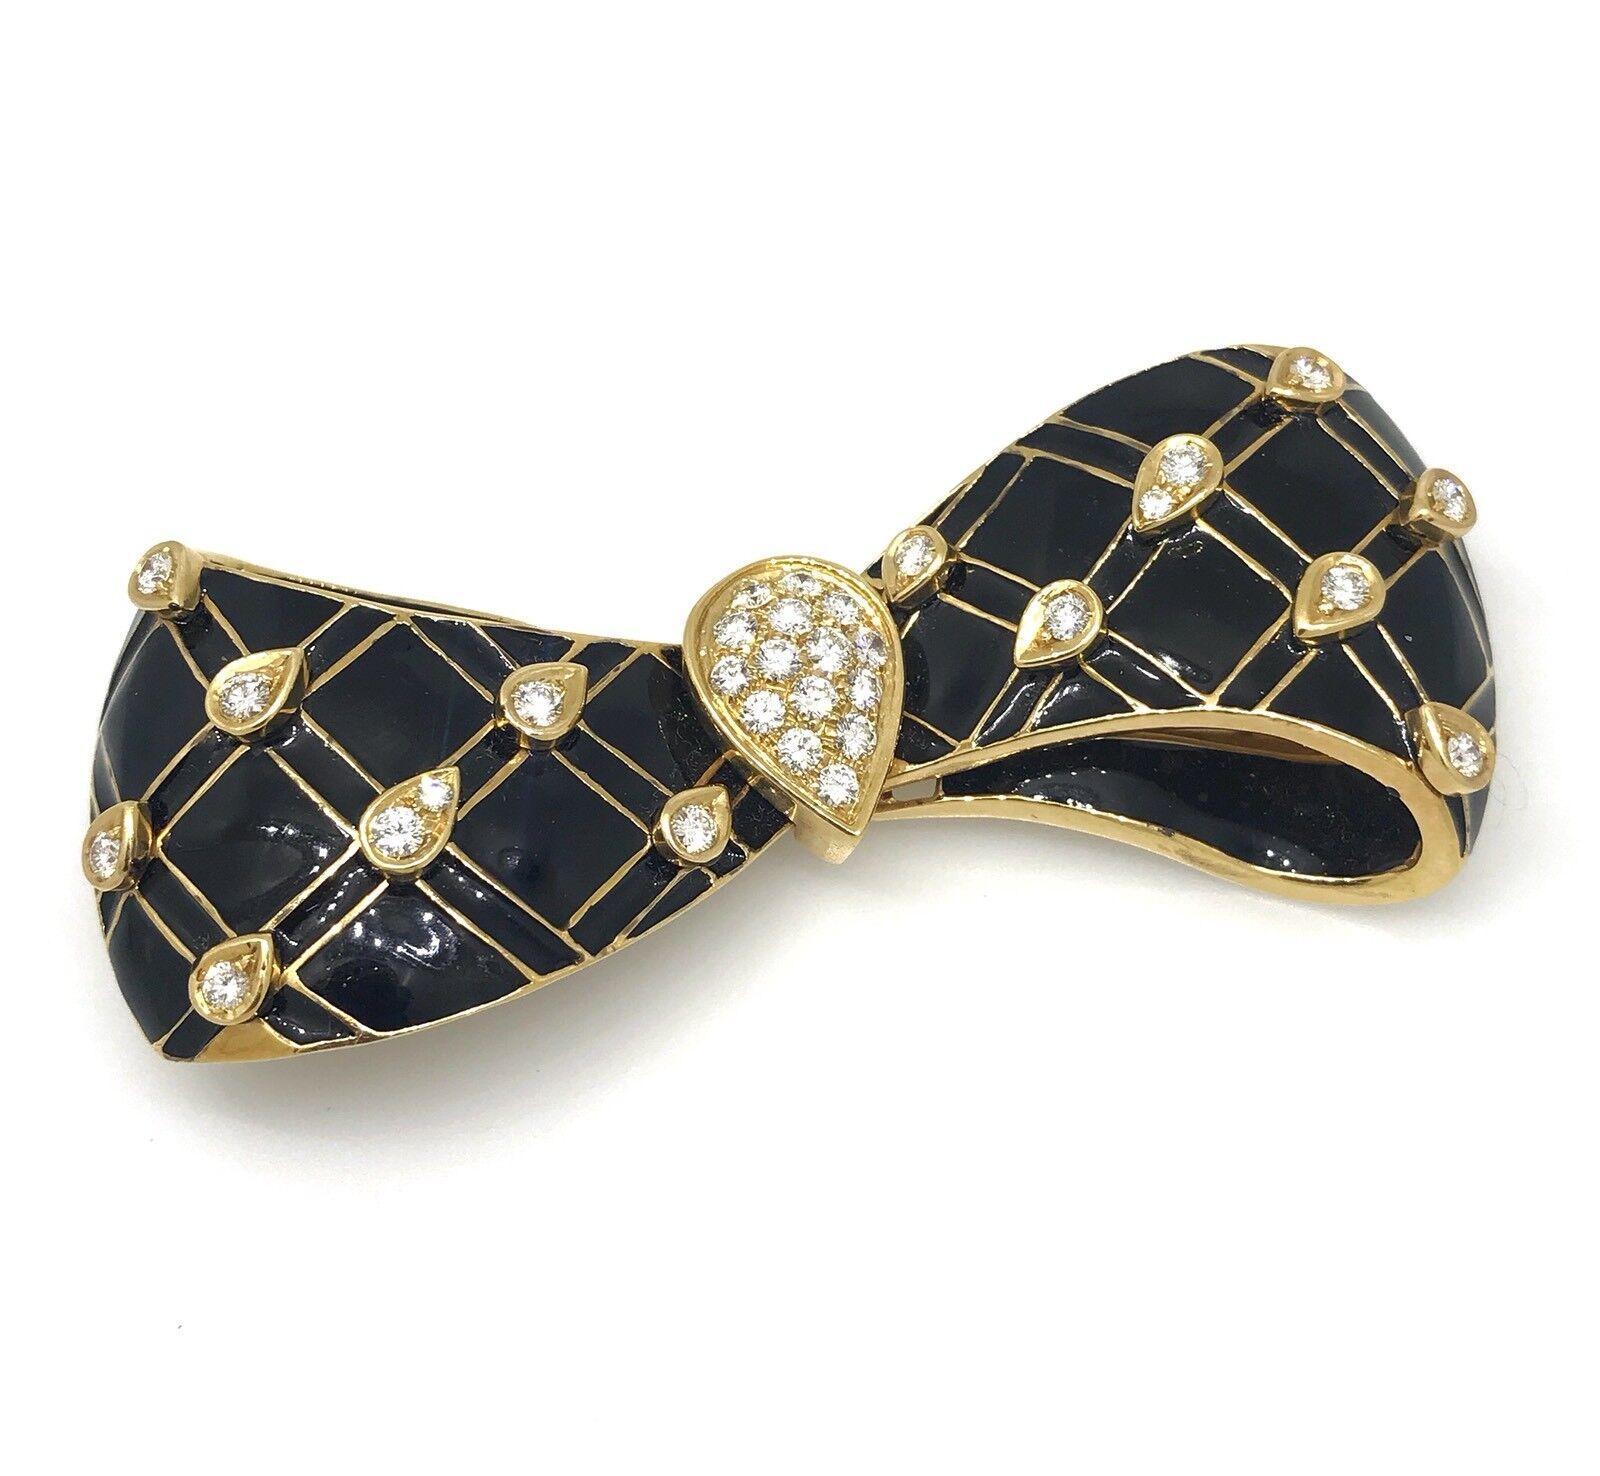 Estate Black Enamel and Diamond Bow Pin / Brooch in 18k Yellow Gold

Large Black Enamel Diamond Bow Brooch features a Pear shaped Pave Diamond section in the center and Diamond patterned on the background with black enamel all in 18k Yellow Gold.